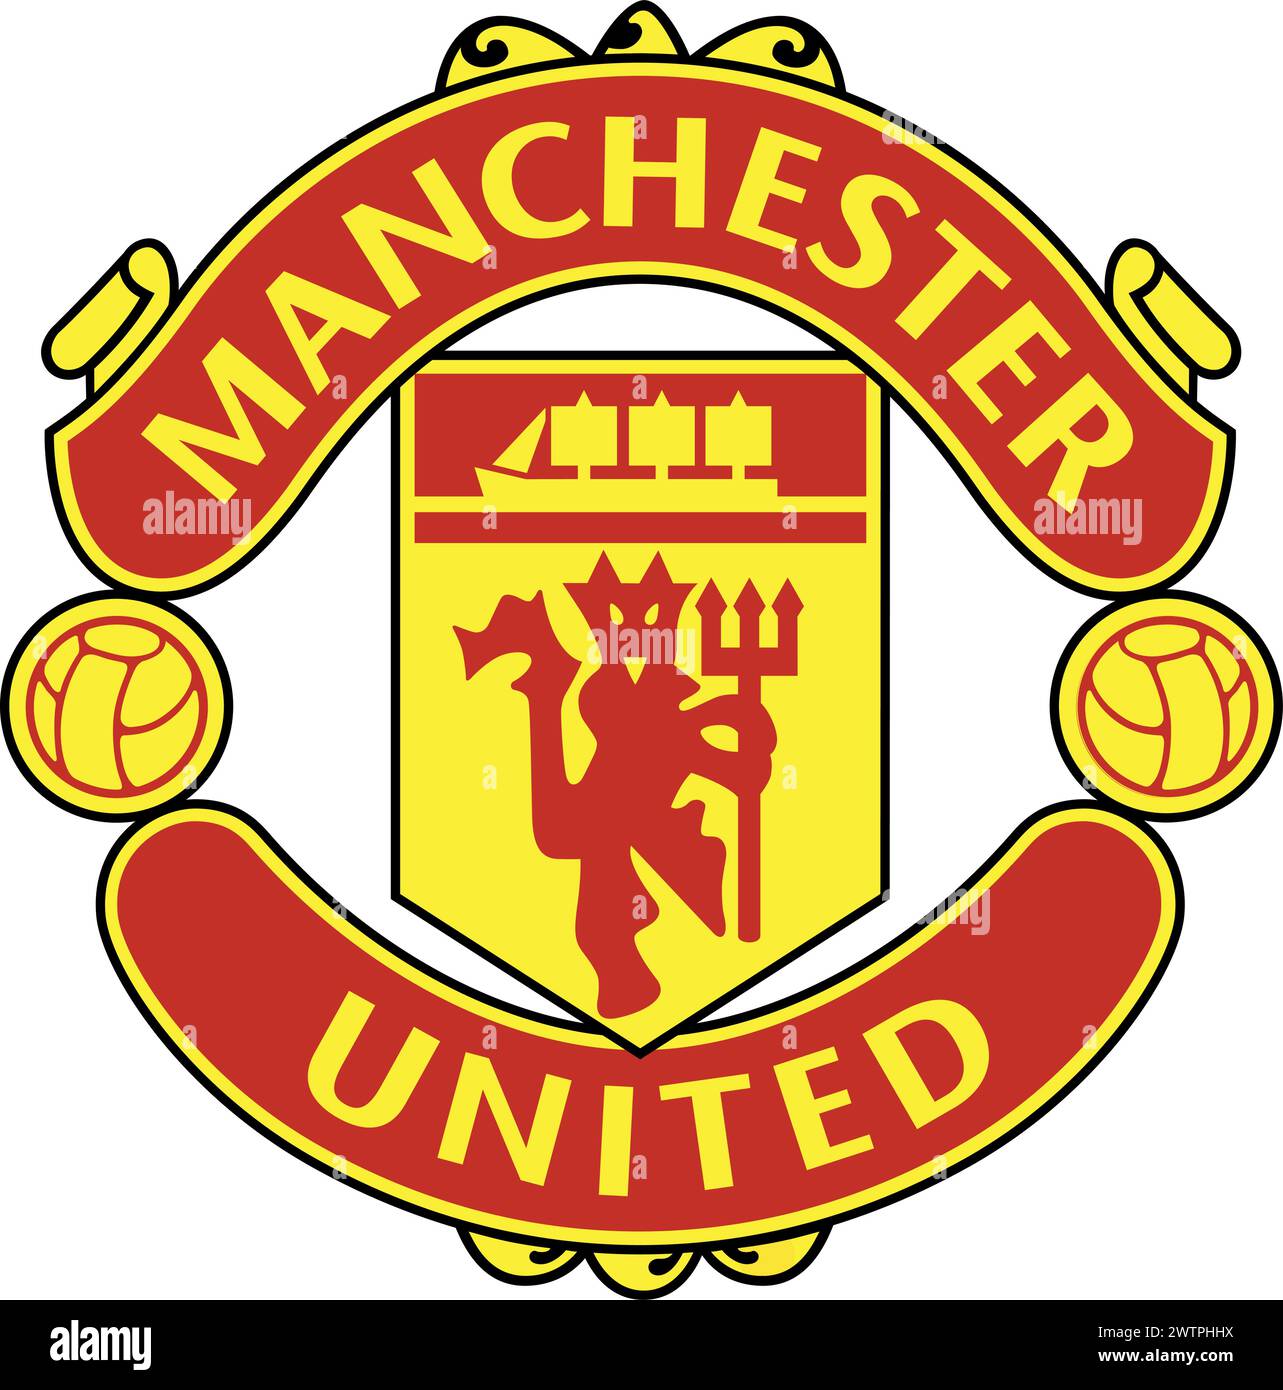 Manchester United logo prepared and cleaned in vector Stock Vector